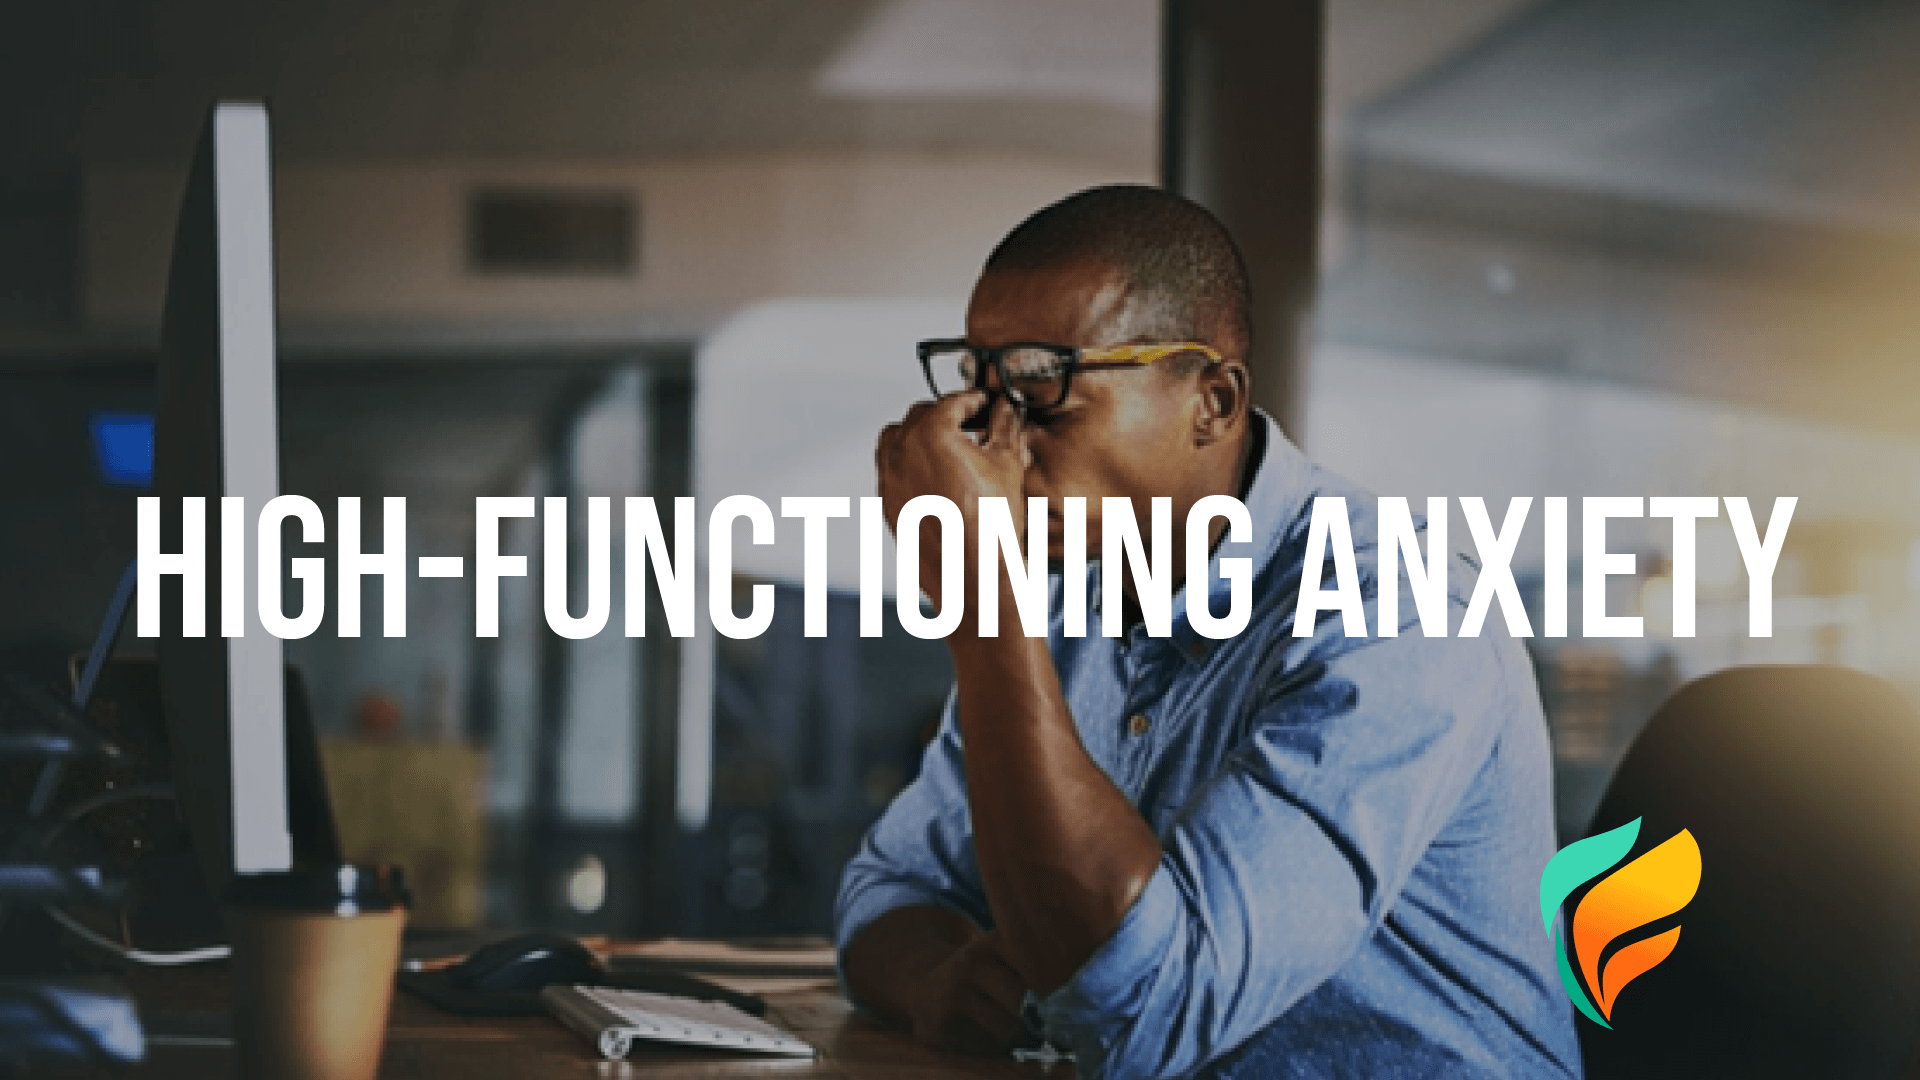 High-Functioning Anxiety: The Symptoms & More